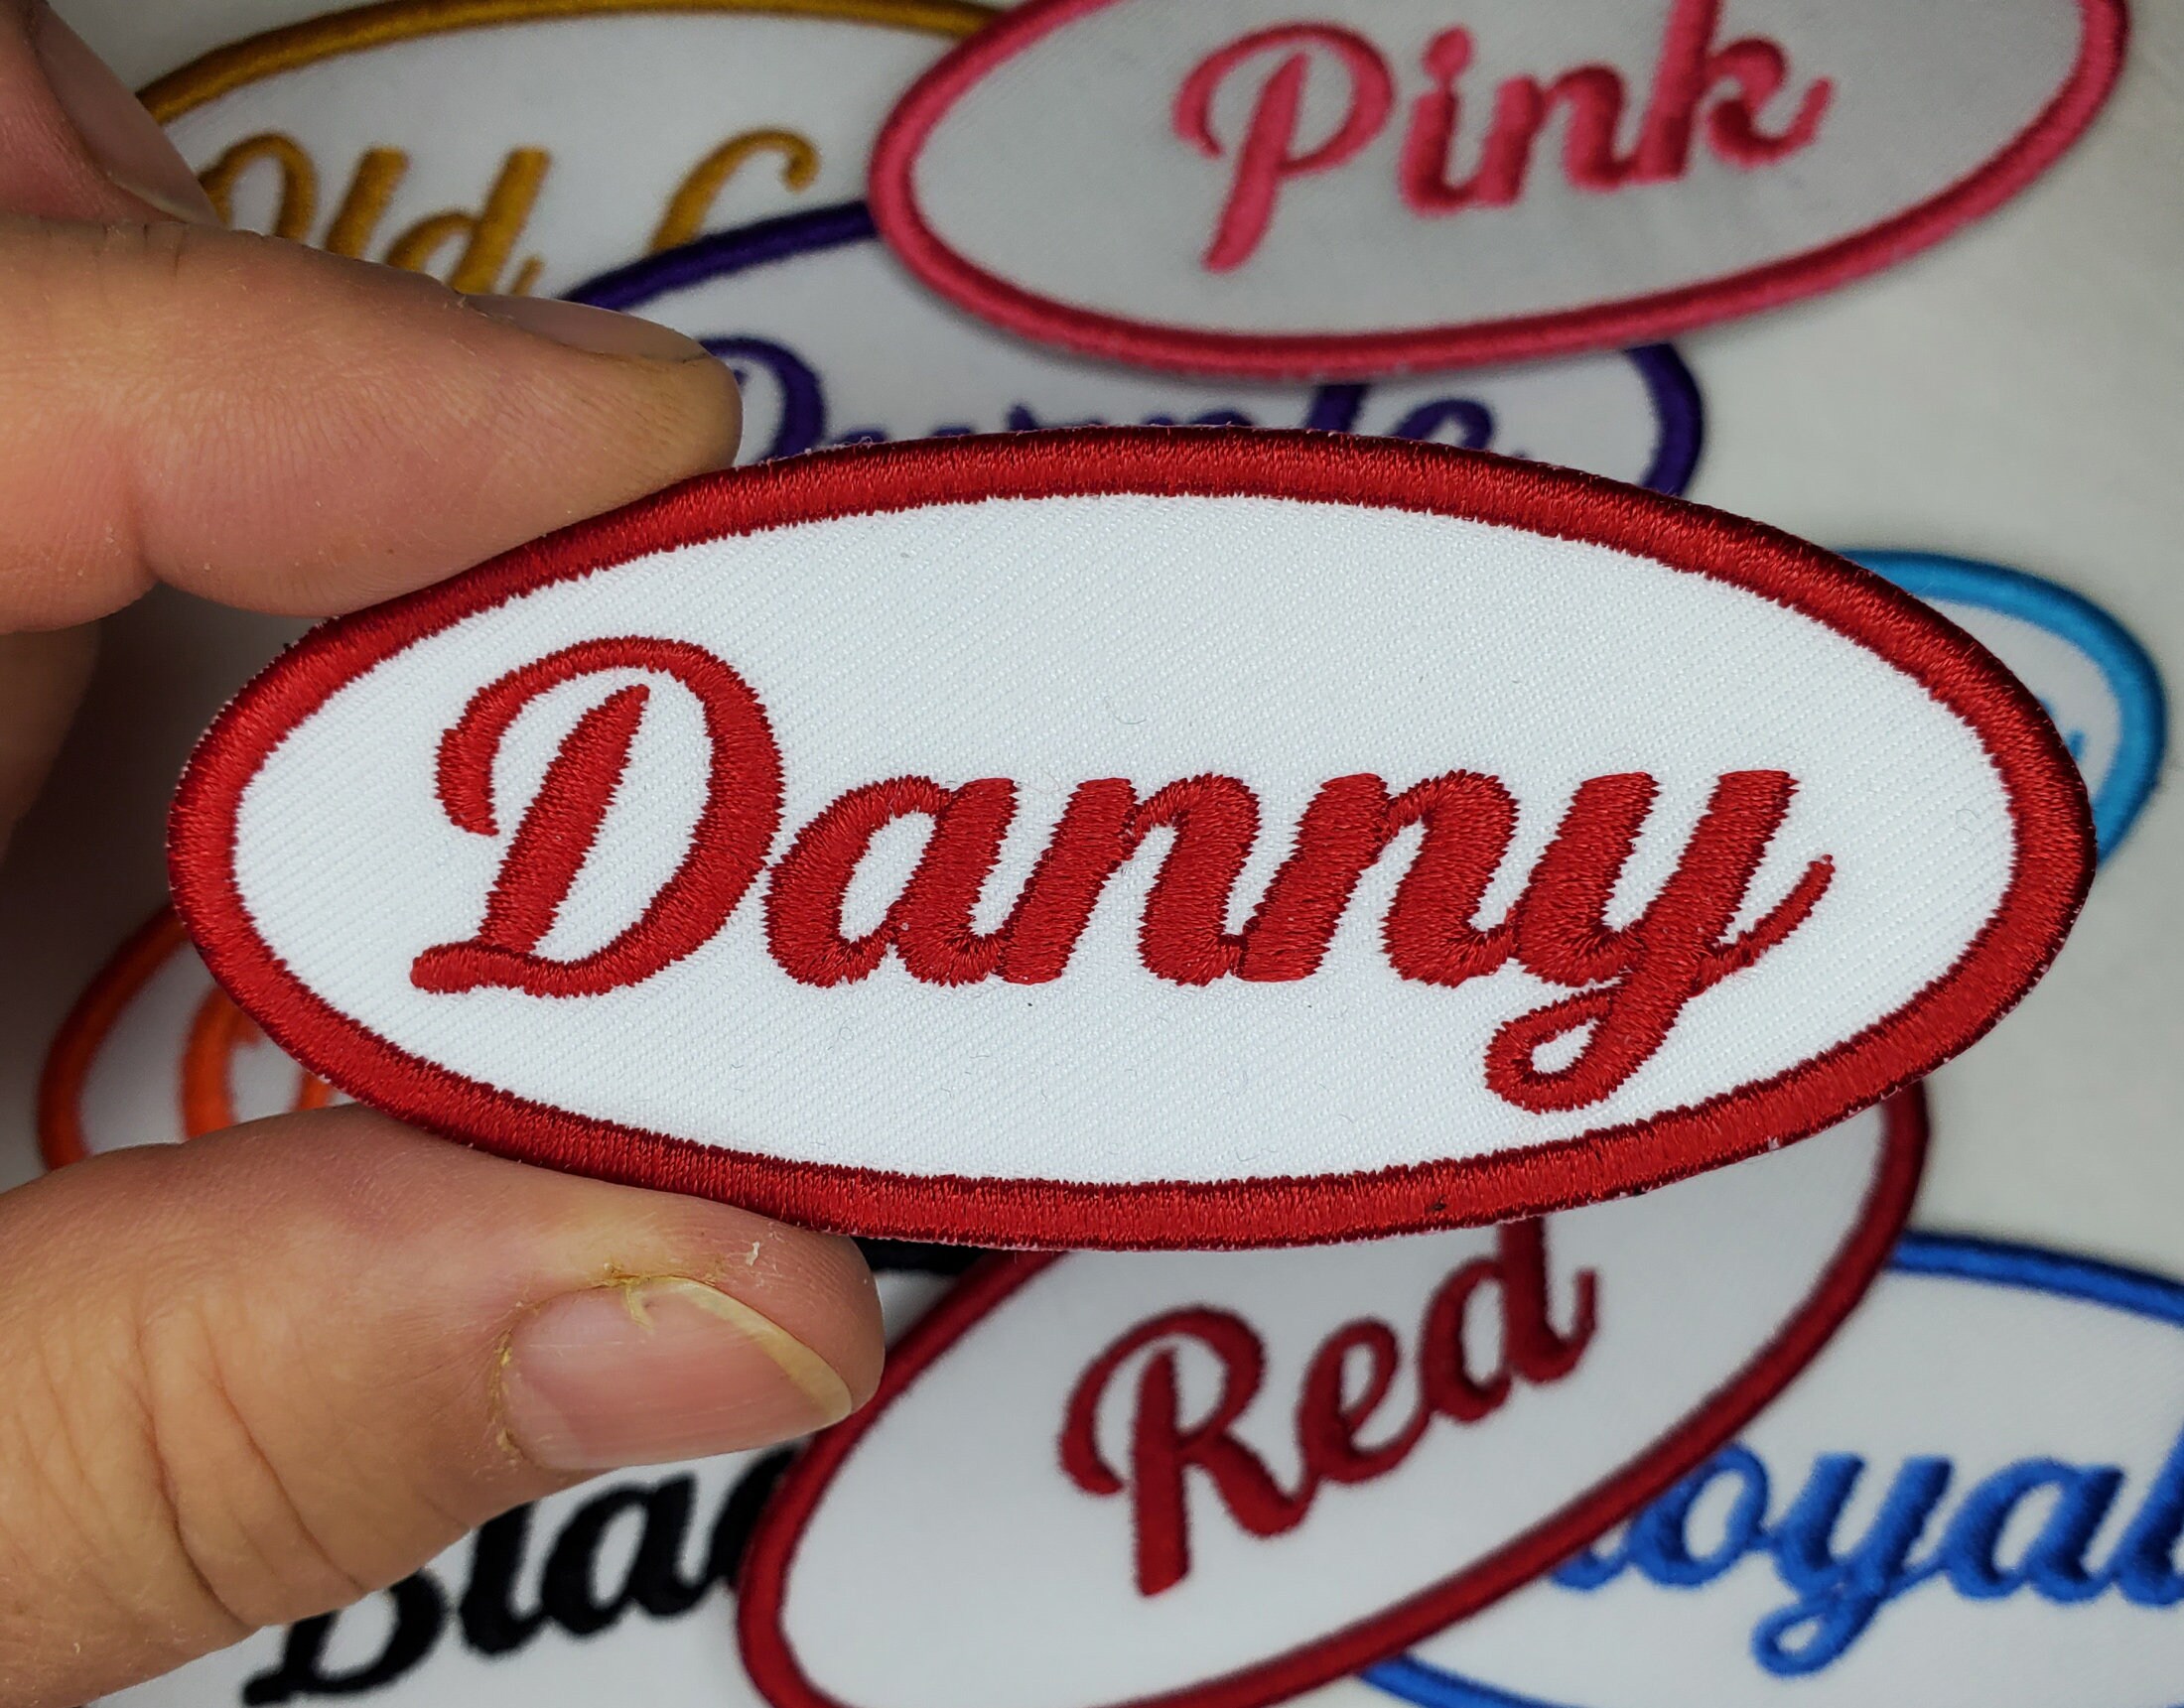 Personalized Adhesive patch, Iron-on Custom Patches, name tag, name  plates